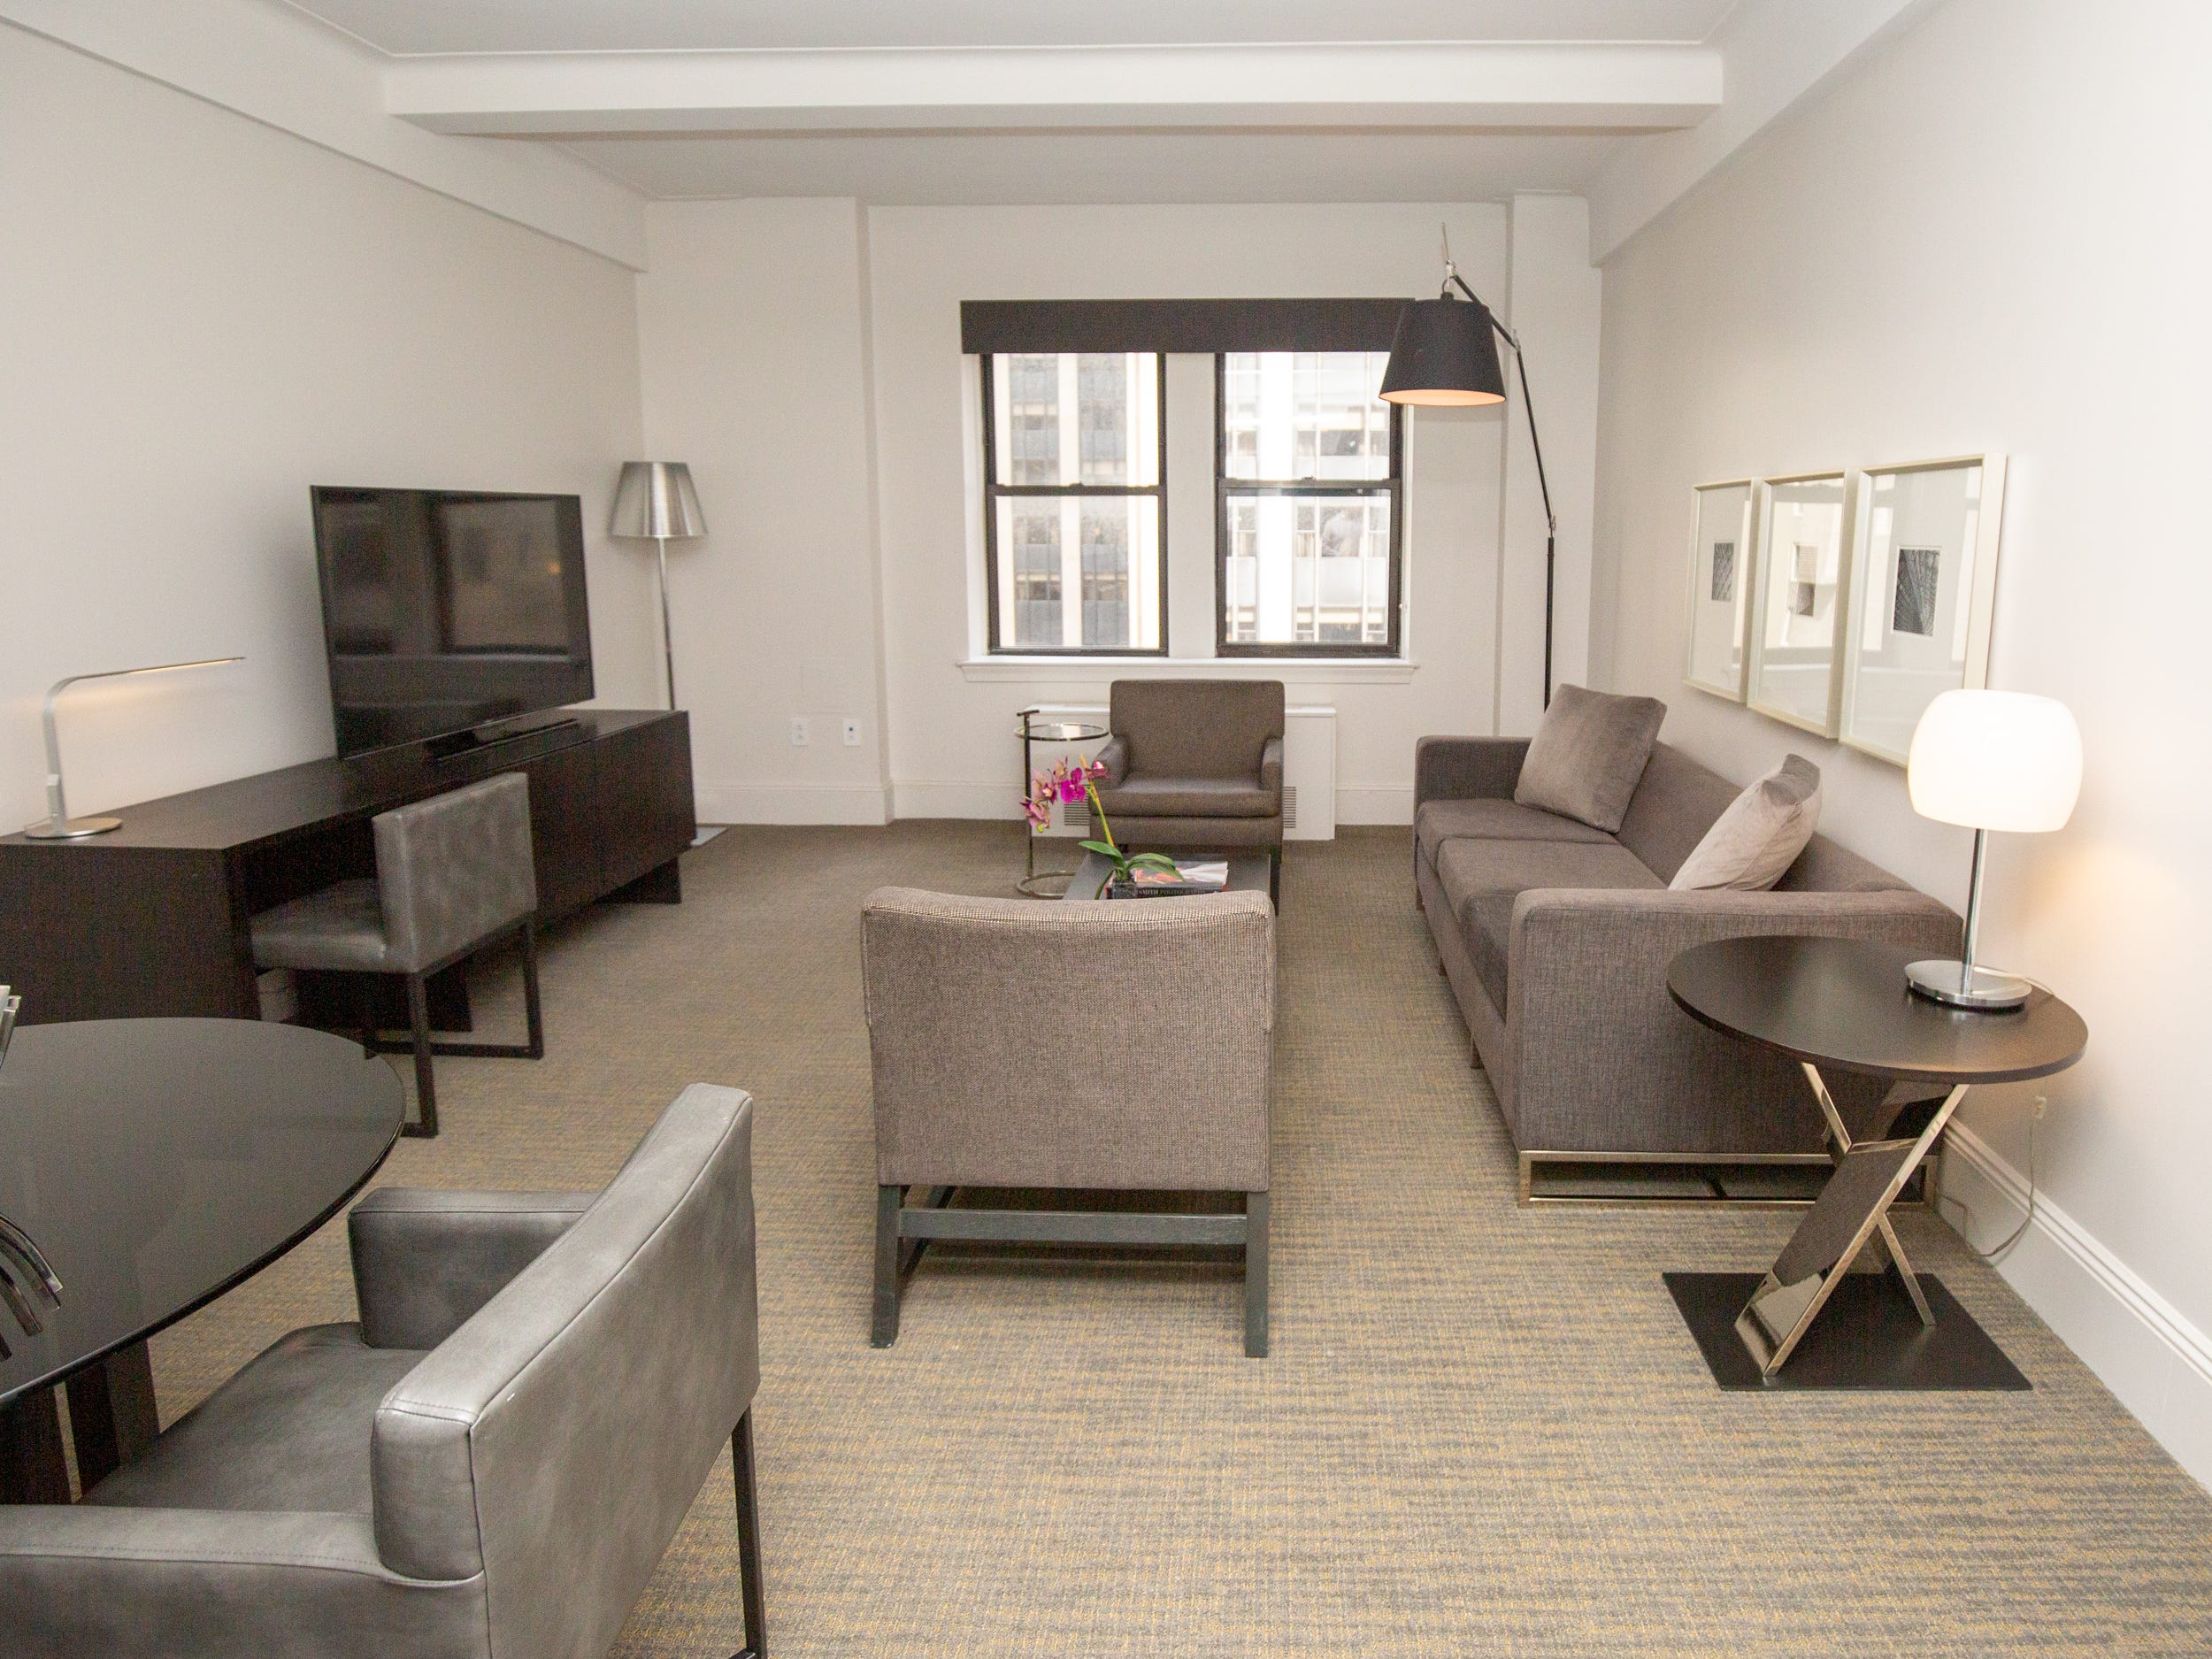 The living room with couches, seats, wall decor, a coffee table, and lights inside a suite at AKA Central Park.